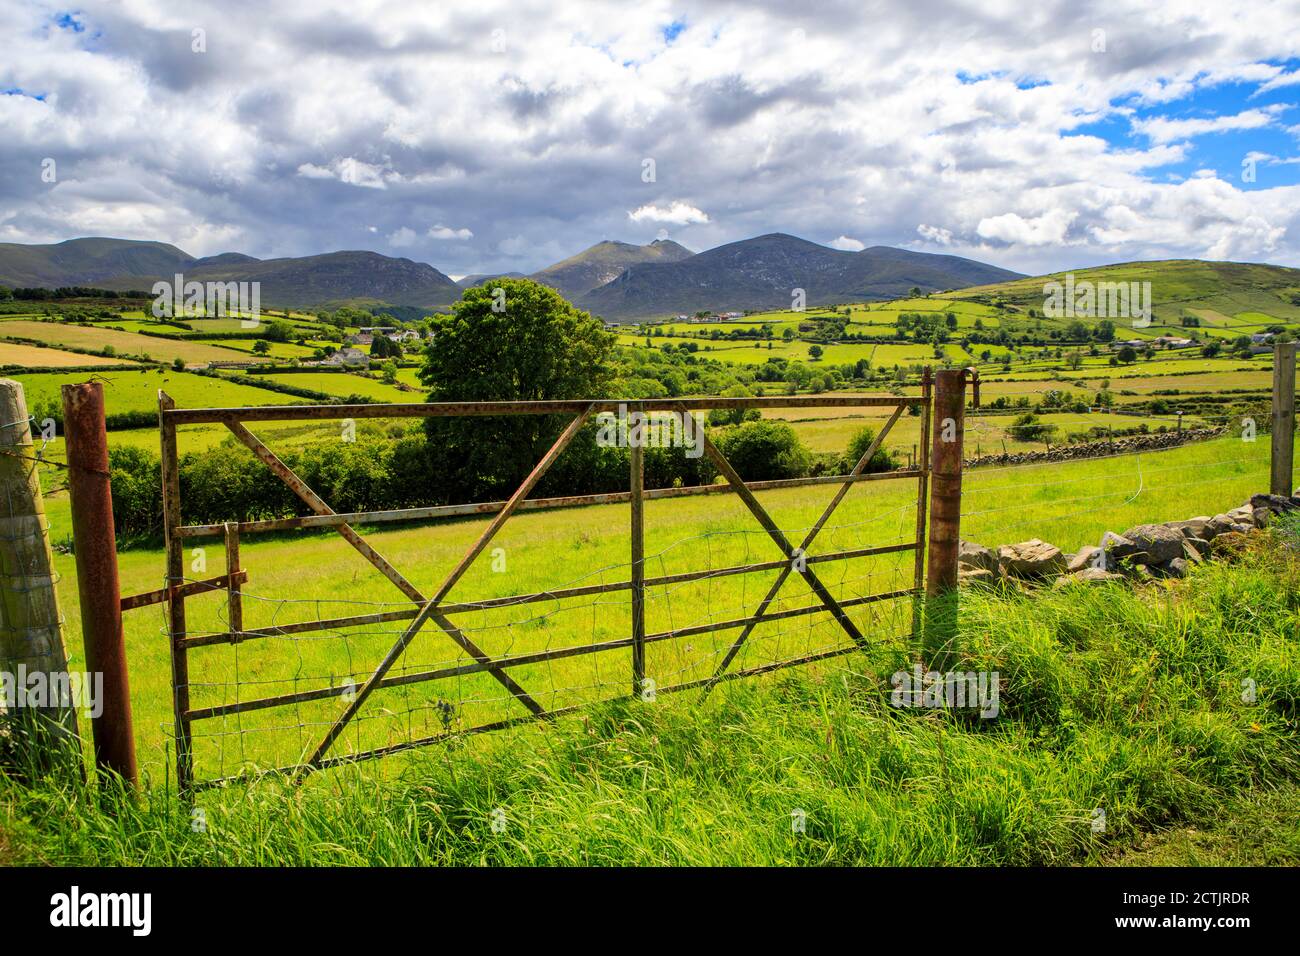 Countryside view of Northern Ireland's Mourne Mountains with green fields and gate under a cloudy blue sky. Stock Photo